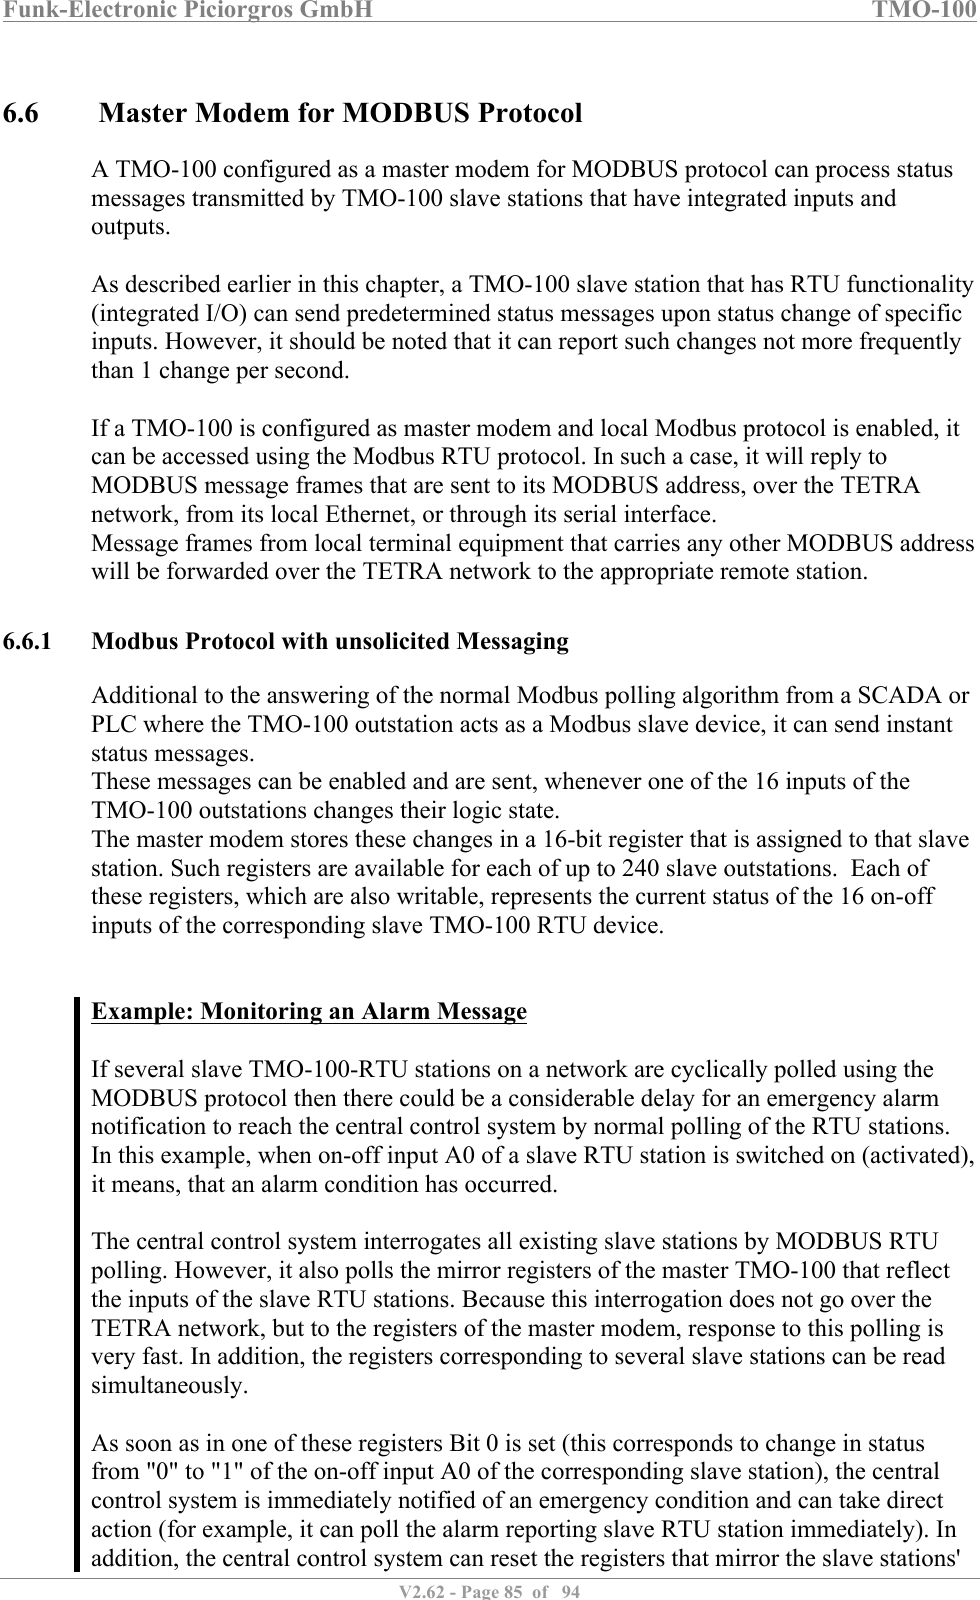 Funk-Electronic Piciorgros GmbH   TMO-100   V2.62 - Page 85  of   94   6.6  Master Modem for MODBUS Protocol A TMO-100 configured as a master modem for MODBUS protocol can process status messages transmitted by TMO-100 slave stations that have integrated inputs and outputs.  As described earlier in this chapter, a TMO-100 slave station that has RTU functionality (integrated I/O) can send predetermined status messages upon status change of specific inputs. However, it should be noted that it can report such changes not more frequently than 1 change per second.   If a TMO-100 is configured as master modem and local Modbus protocol is enabled, it can be accessed using the Modbus RTU protocol. In such a case, it will reply to MODBUS message frames that are sent to its MODBUS address, over the TETRA network, from its local Ethernet, or through its serial interface.  Message frames from local terminal equipment that carries any other MODBUS address will be forwarded over the TETRA network to the appropriate remote station.   6.6.1 Modbus Protocol with unsolicited Messaging Additional to the answering of the normal Modbus polling algorithm from a SCADA or PLC where the TMO-100 outstation acts as a Modbus slave device, it can send instant status messages. These messages can be enabled and are sent, whenever one of the 16 inputs of the TMO-100 outstations changes their logic state. The master modem stores these changes in a 16-bit register that is assigned to that slave station. Such registers are available for each of up to 240 slave outstations.  Each of these registers, which are also writable, represents the current status of the 16 on-off inputs of the corresponding slave TMO-100 RTU device.   Example: Monitoring an Alarm Message  If several slave TMO-100-RTU stations on a network are cyclically polled using the MODBUS protocol then there could be a considerable delay for an emergency alarm notification to reach the central control system by normal polling of the RTU stations.  In this example, when on-off input A0 of a slave RTU station is switched on (activated), it means, that an alarm condition has occurred.   The central control system interrogates all existing slave stations by MODBUS RTU polling. However, it also polls the mirror registers of the master TMO-100 that reflect the inputs of the slave RTU stations. Because this interrogation does not go over the TETRA network, but to the registers of the master modem, response to this polling is very fast. In addition, the registers corresponding to several slave stations can be read simultaneously.   As soon as in one of these registers Bit 0 is set (this corresponds to change in status from &quot;0&quot; to &quot;1&quot; of the on-off input A0 of the corresponding slave station), the central control system is immediately notified of an emergency condition and can take direct action (for example, it can poll the alarm reporting slave RTU station immediately). In addition, the central control system can reset the registers that mirror the slave stations&apos; 